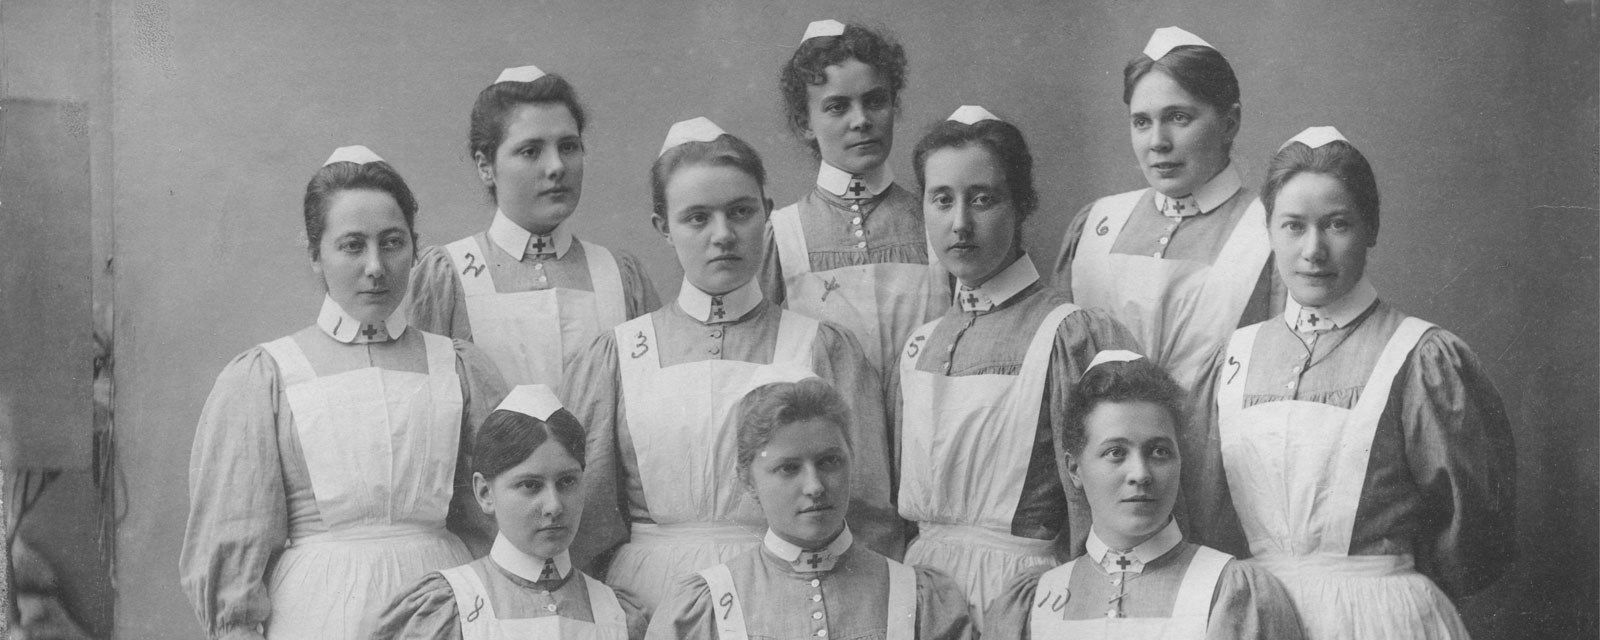 Showing the first Red Cross nurses from 1897